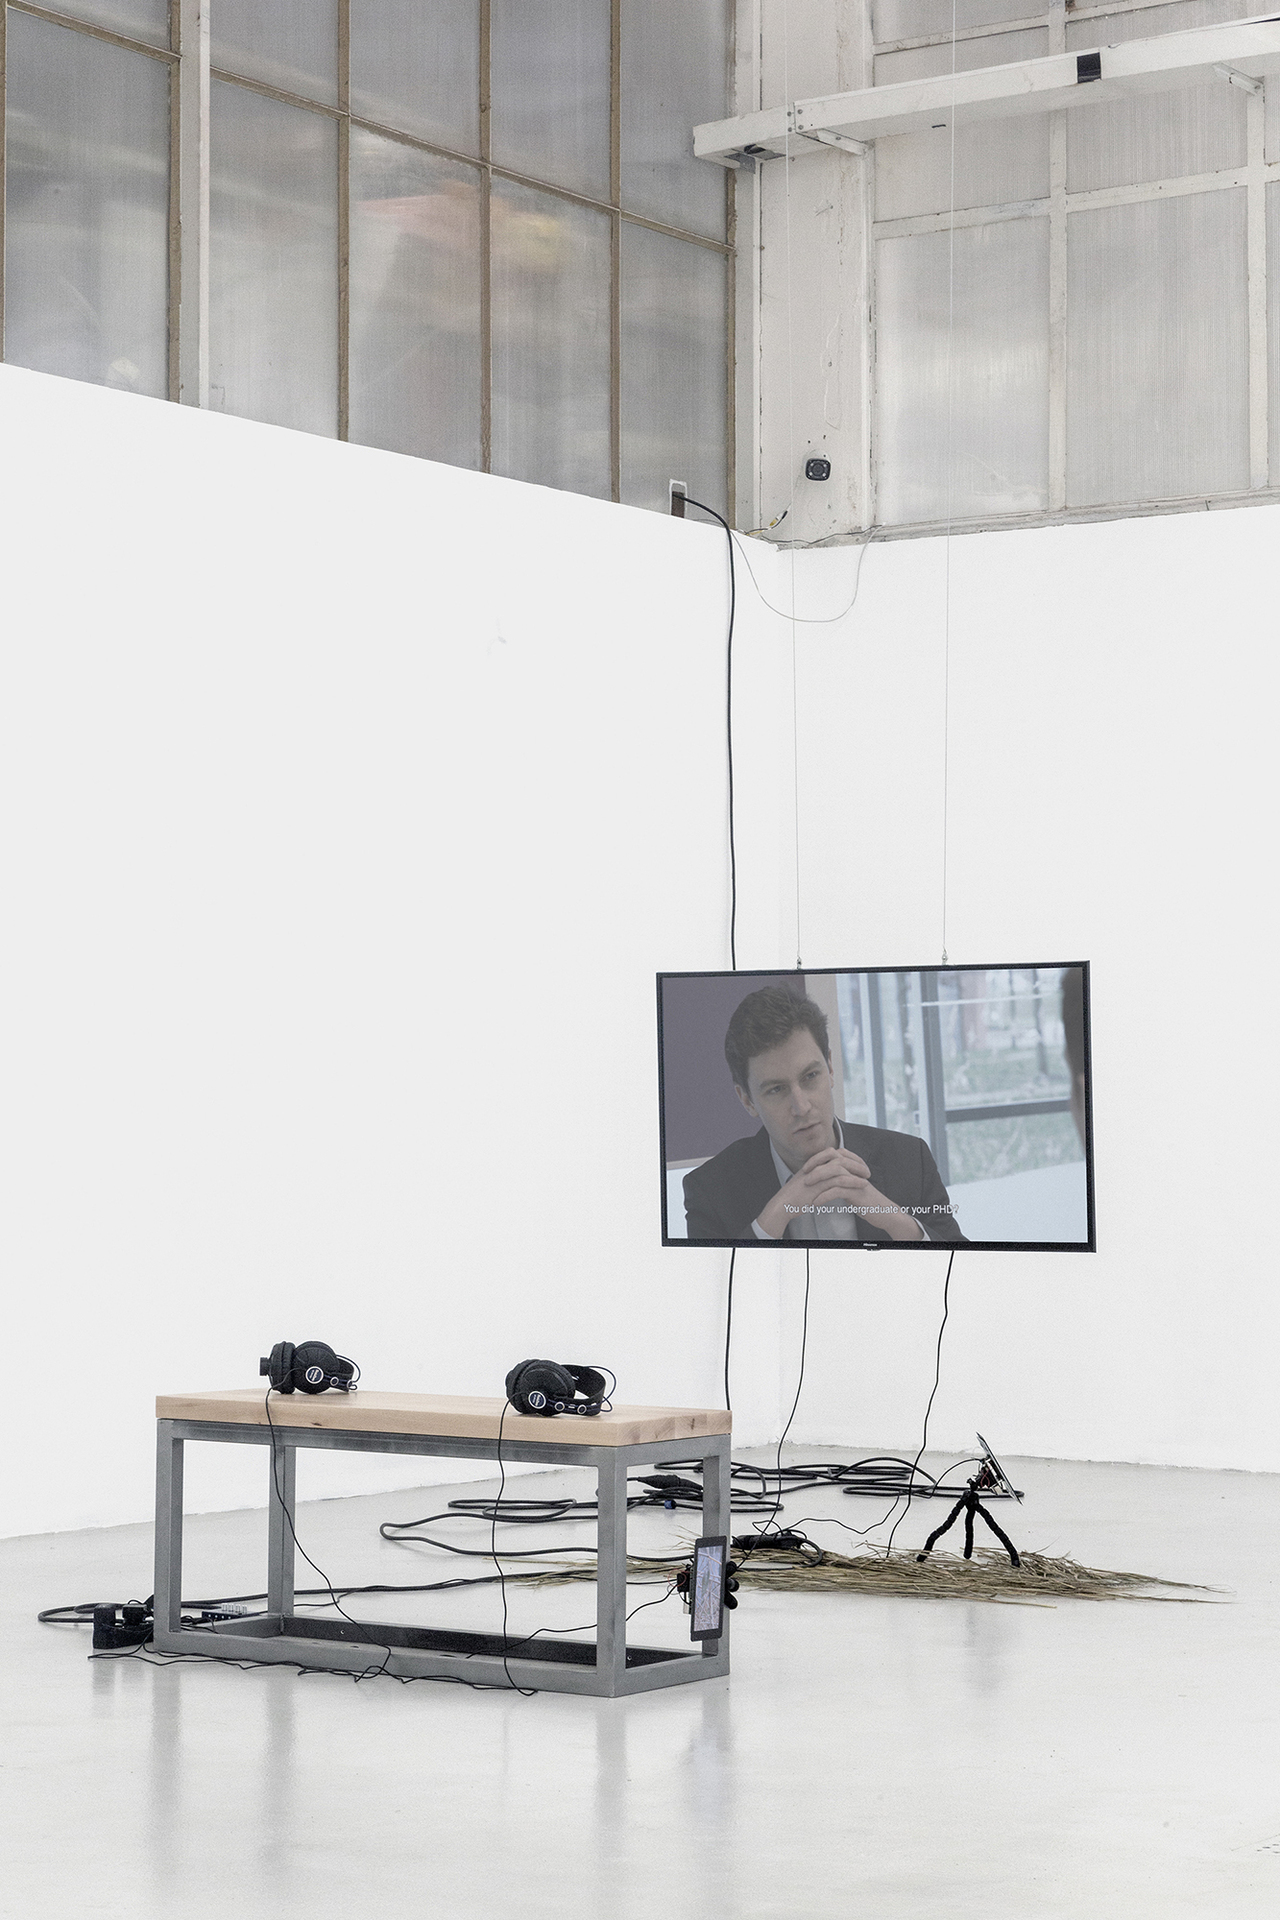 Tom K Kemp, ‘Napoleon Complex’, 2020, video installation consisting of HD single channel video, 17m, with 1m animation loops and props from film set.